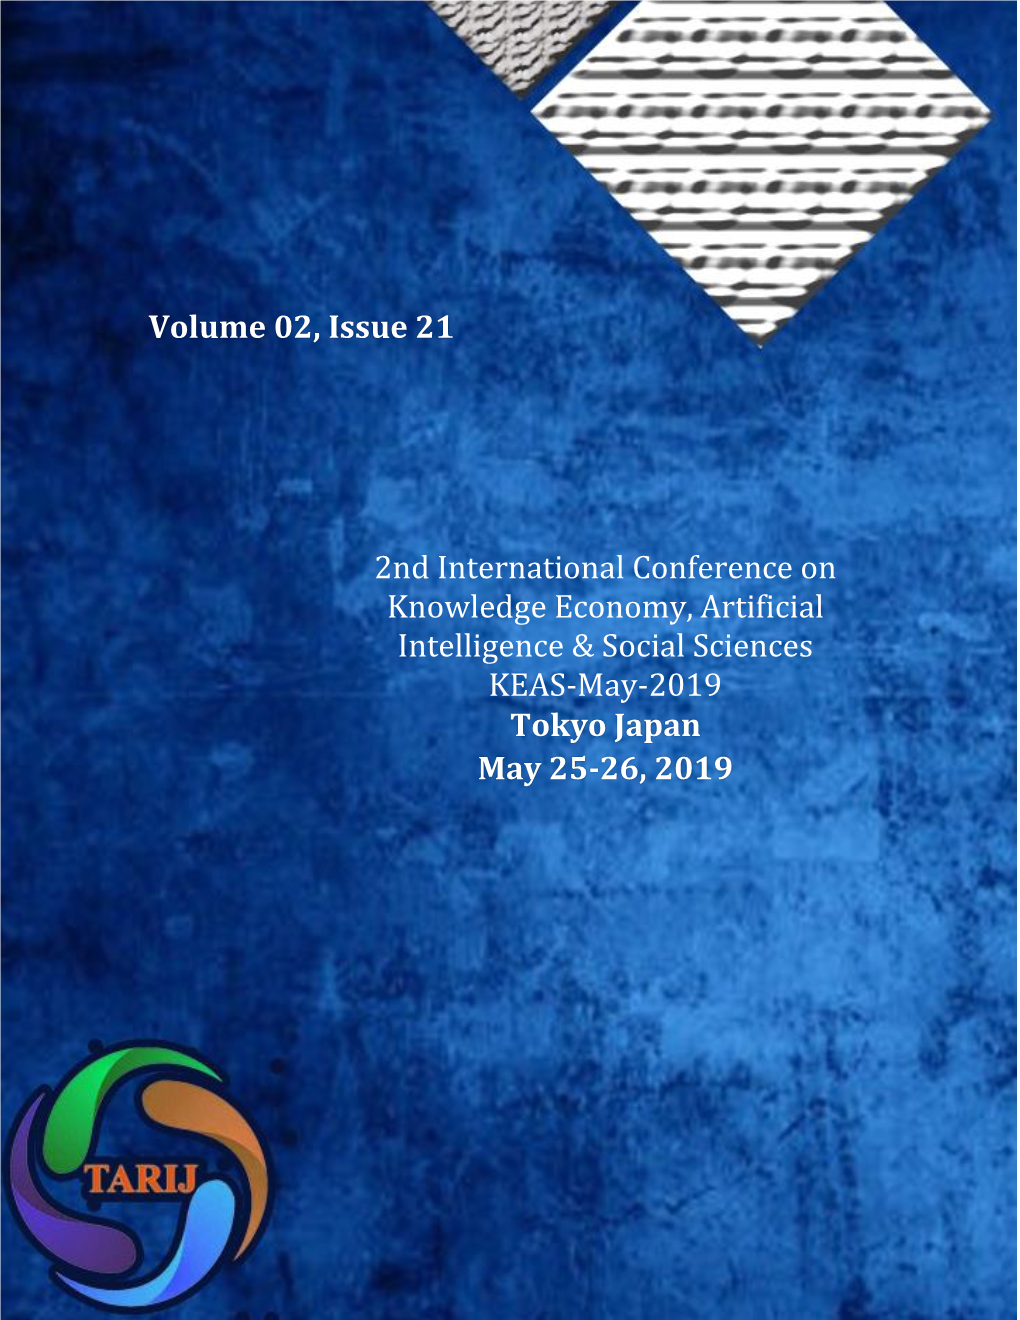 Volume 01, Issue 02 Annual International Conference on Recent